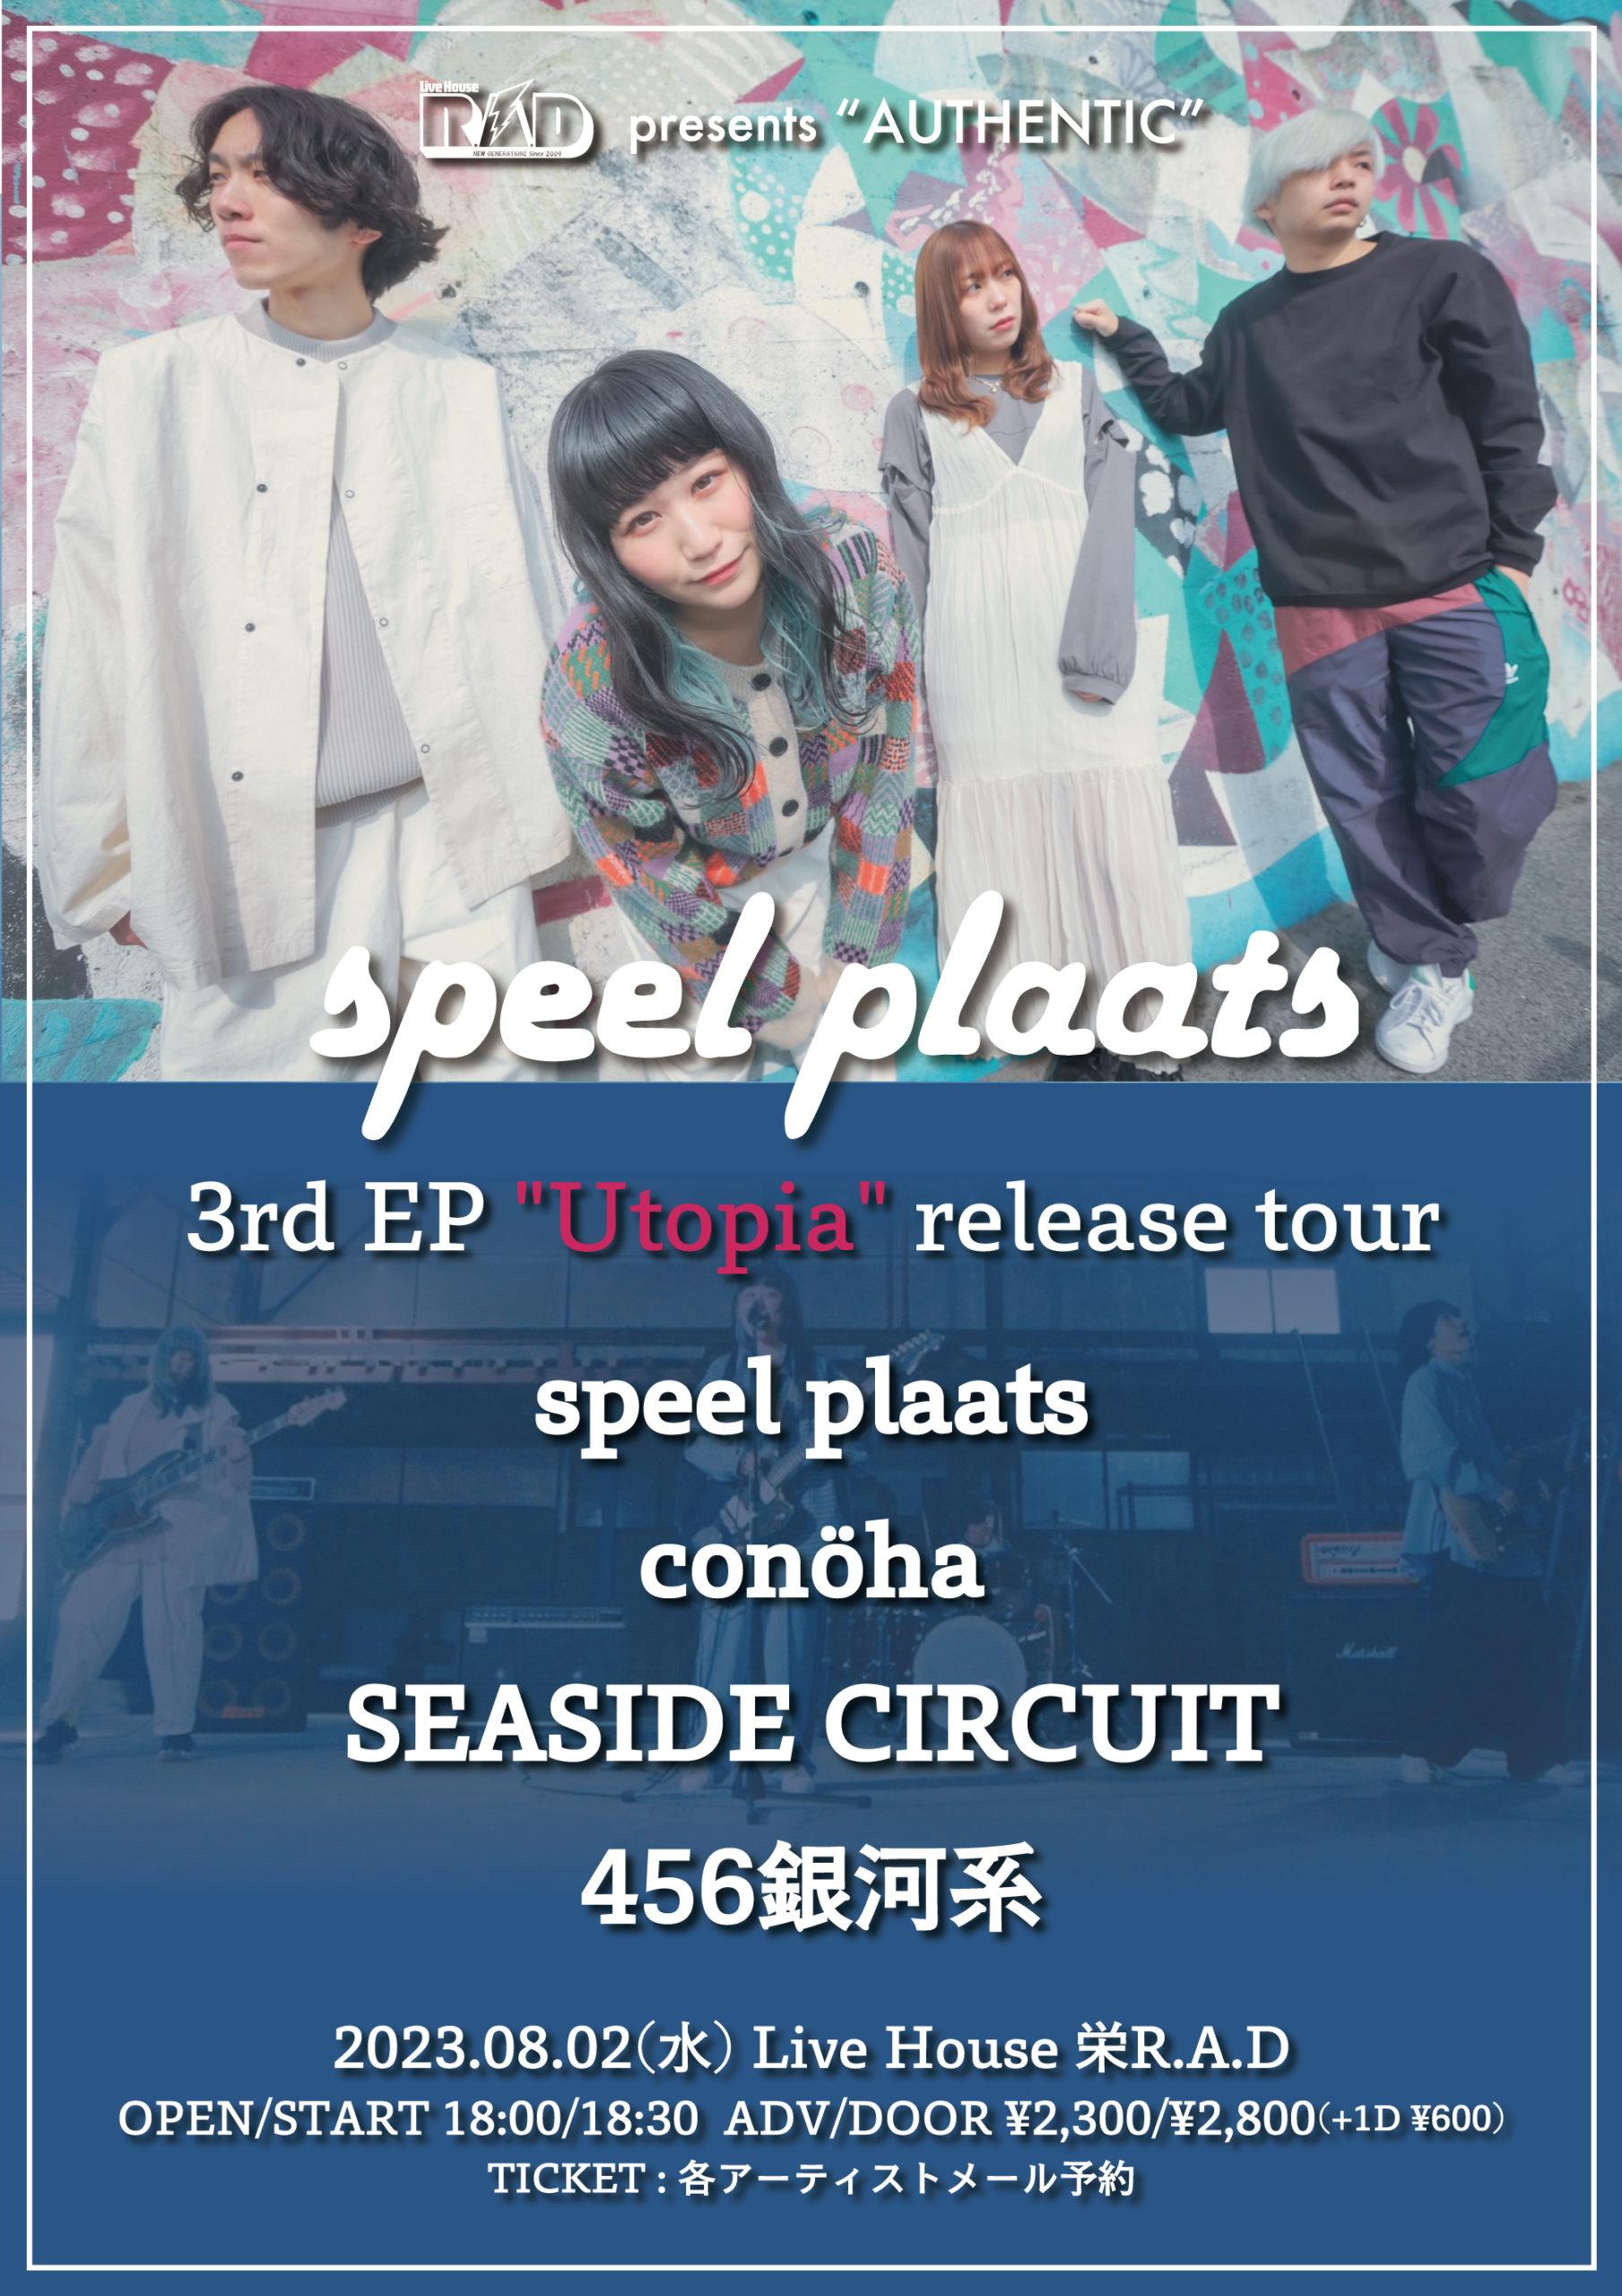 R.A.D presents "AUTHENTIC" speel plaats 3rd EP "Utopia" release tour